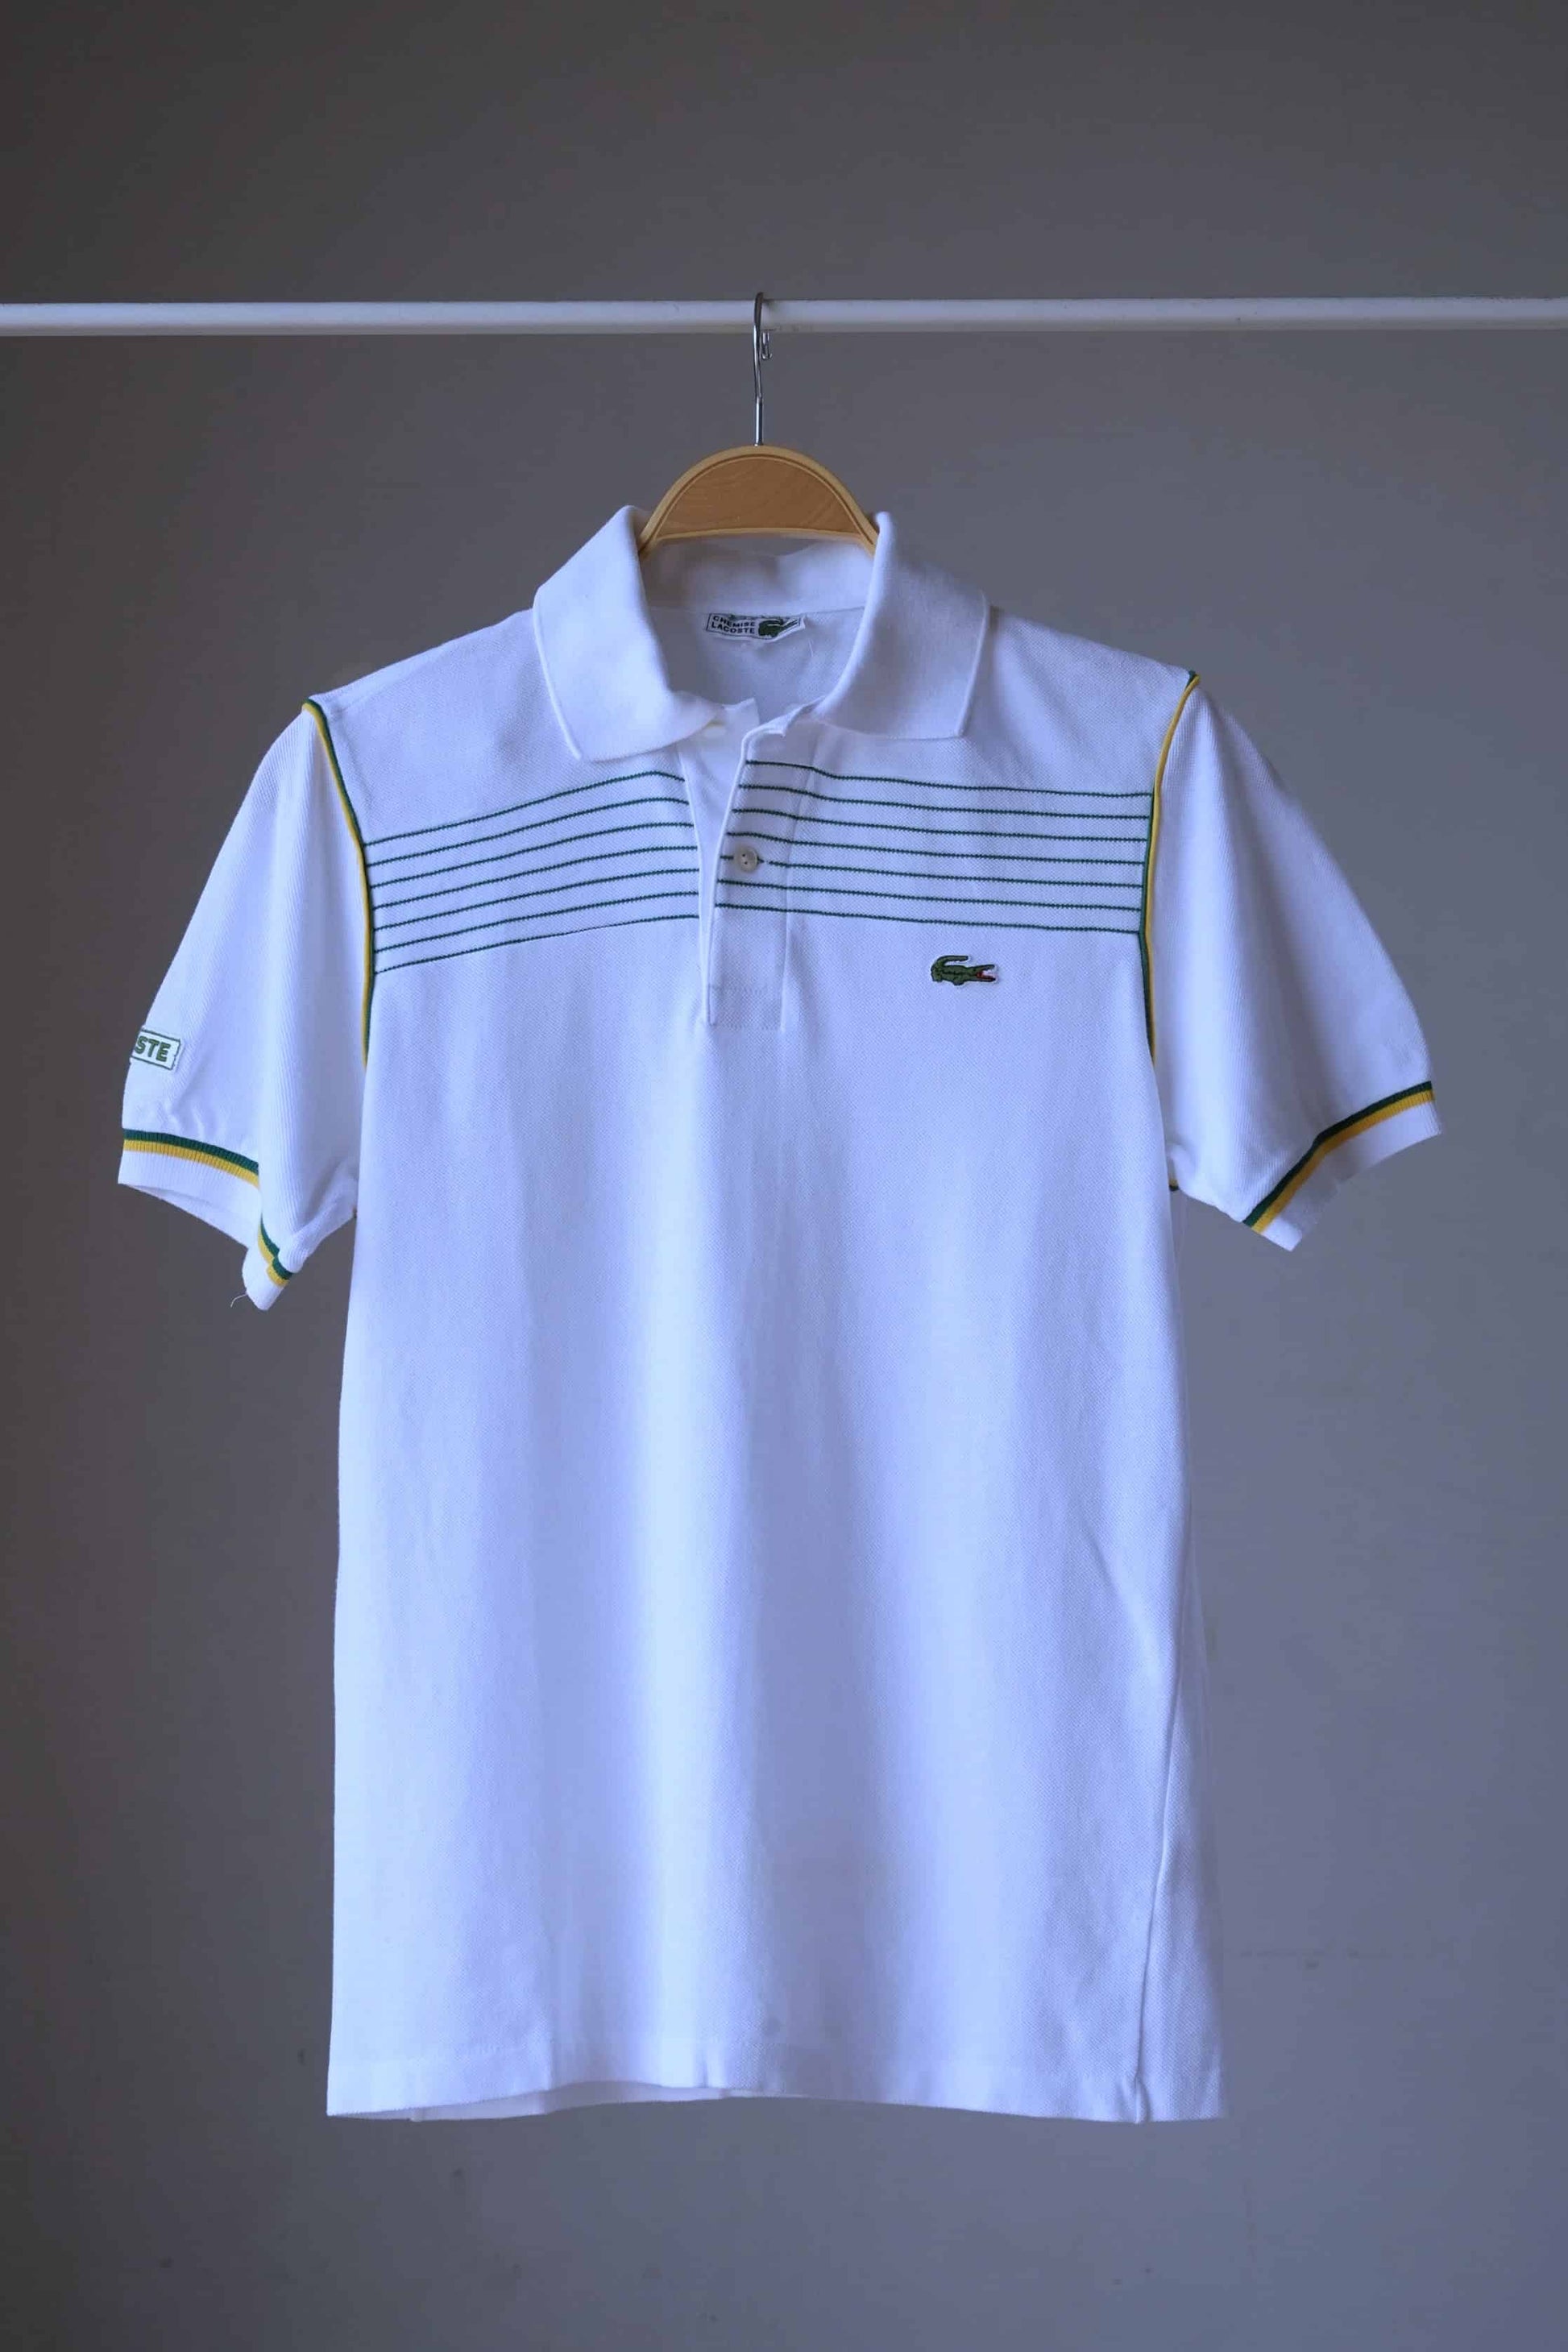 LACOSTE Retro Polo in white with yellow stripes and green edging photographed on hanger